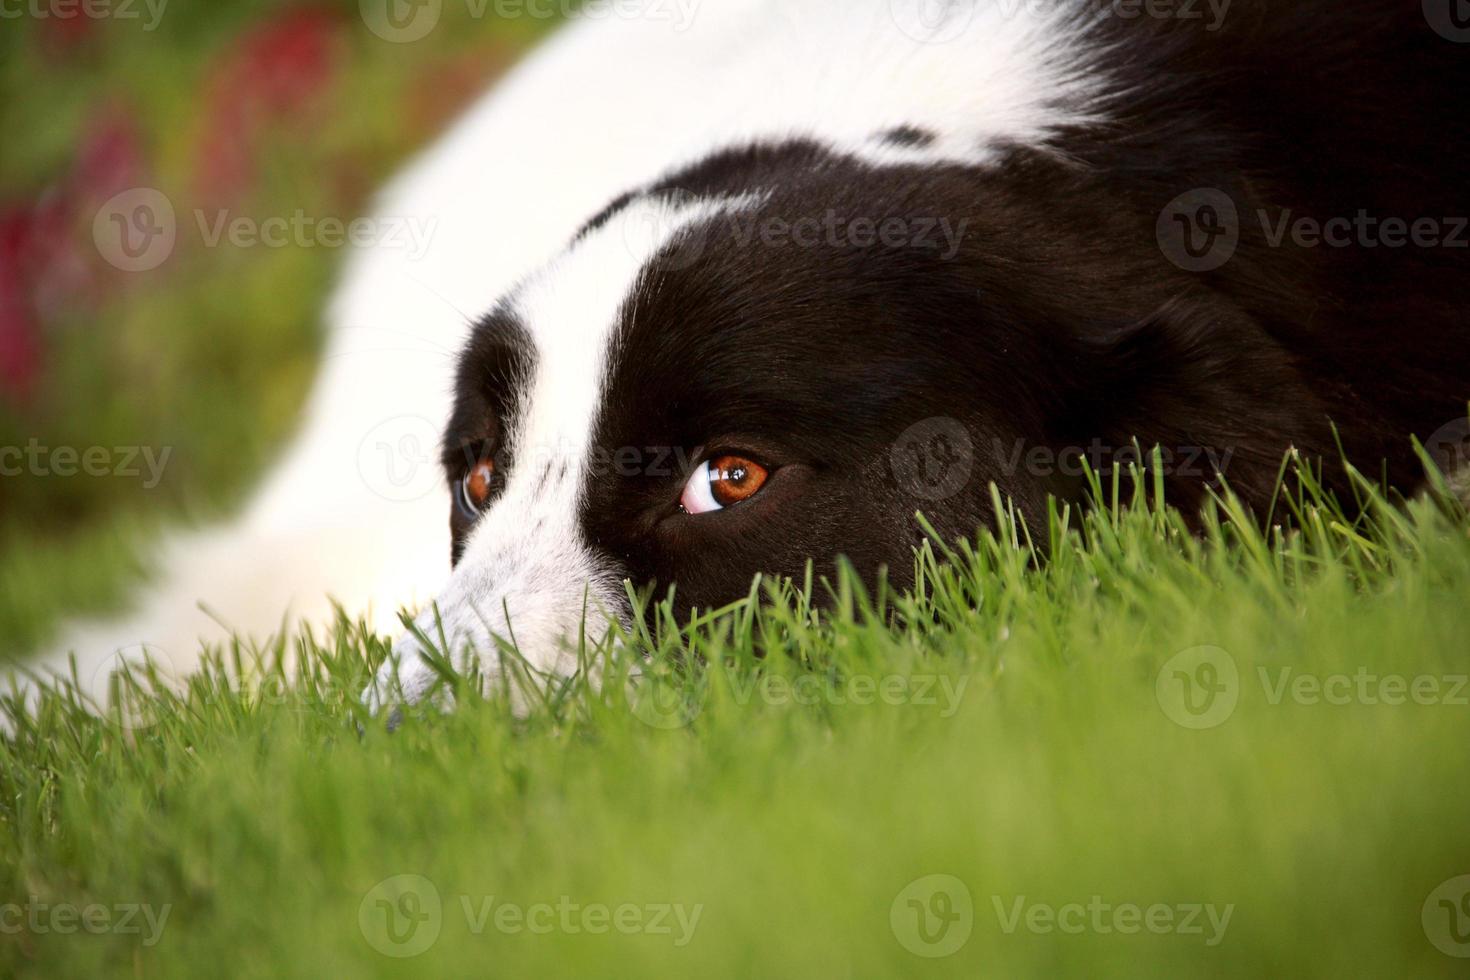 Dog on lawn eyeing the photographer photo